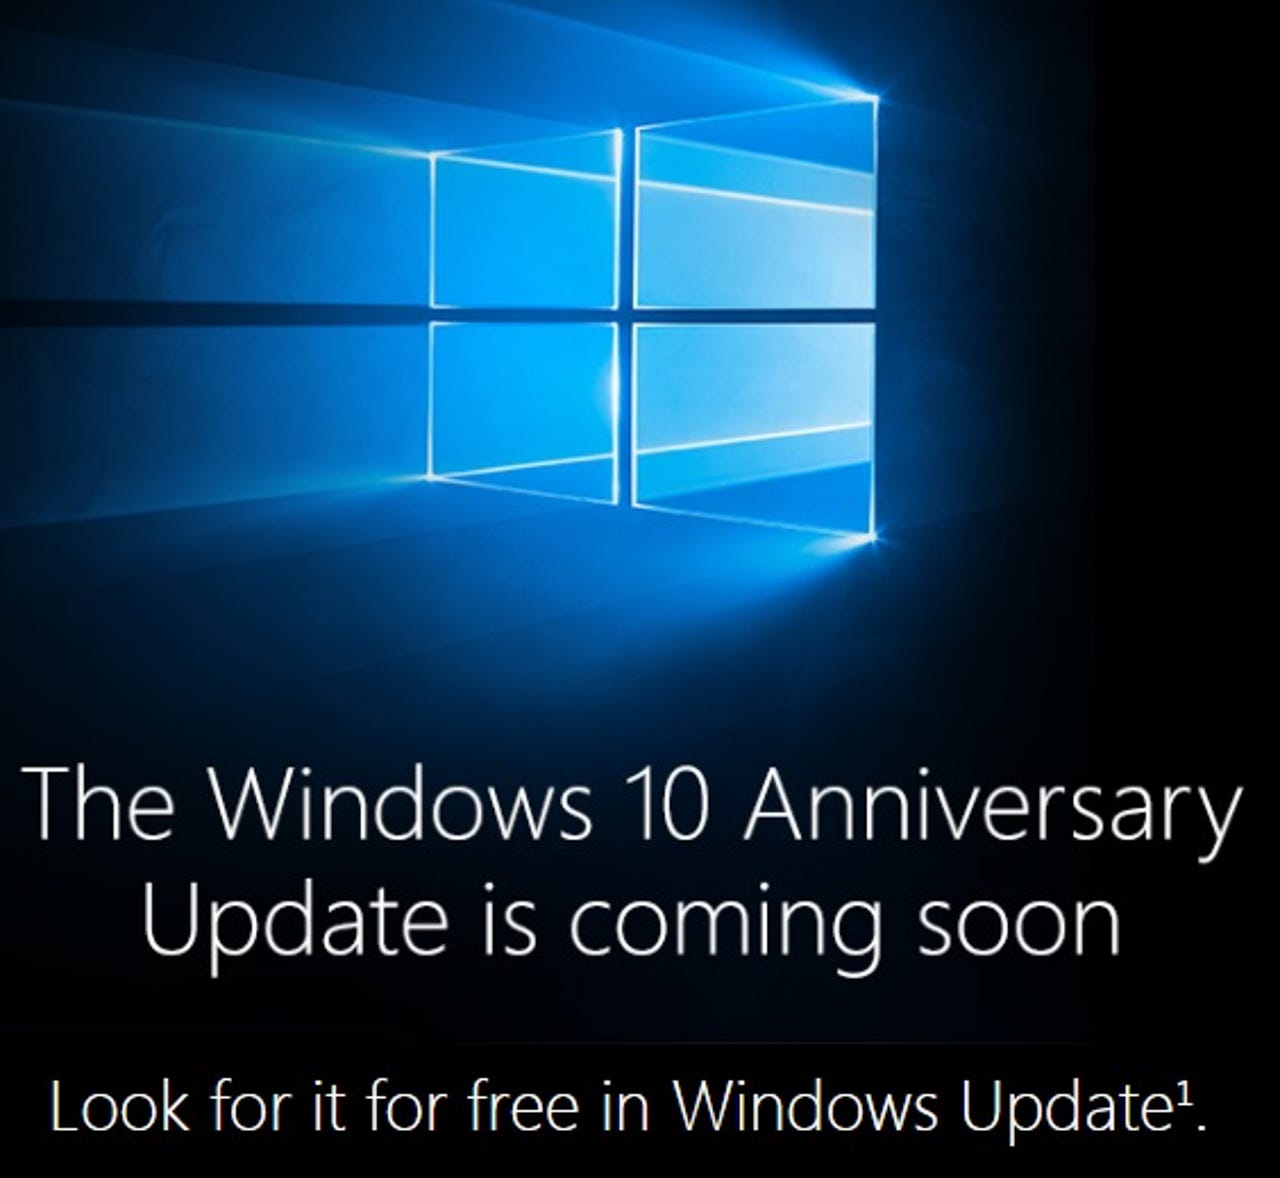 Windows 10 Anniversary Update Rollout May Not Be Done Until Early